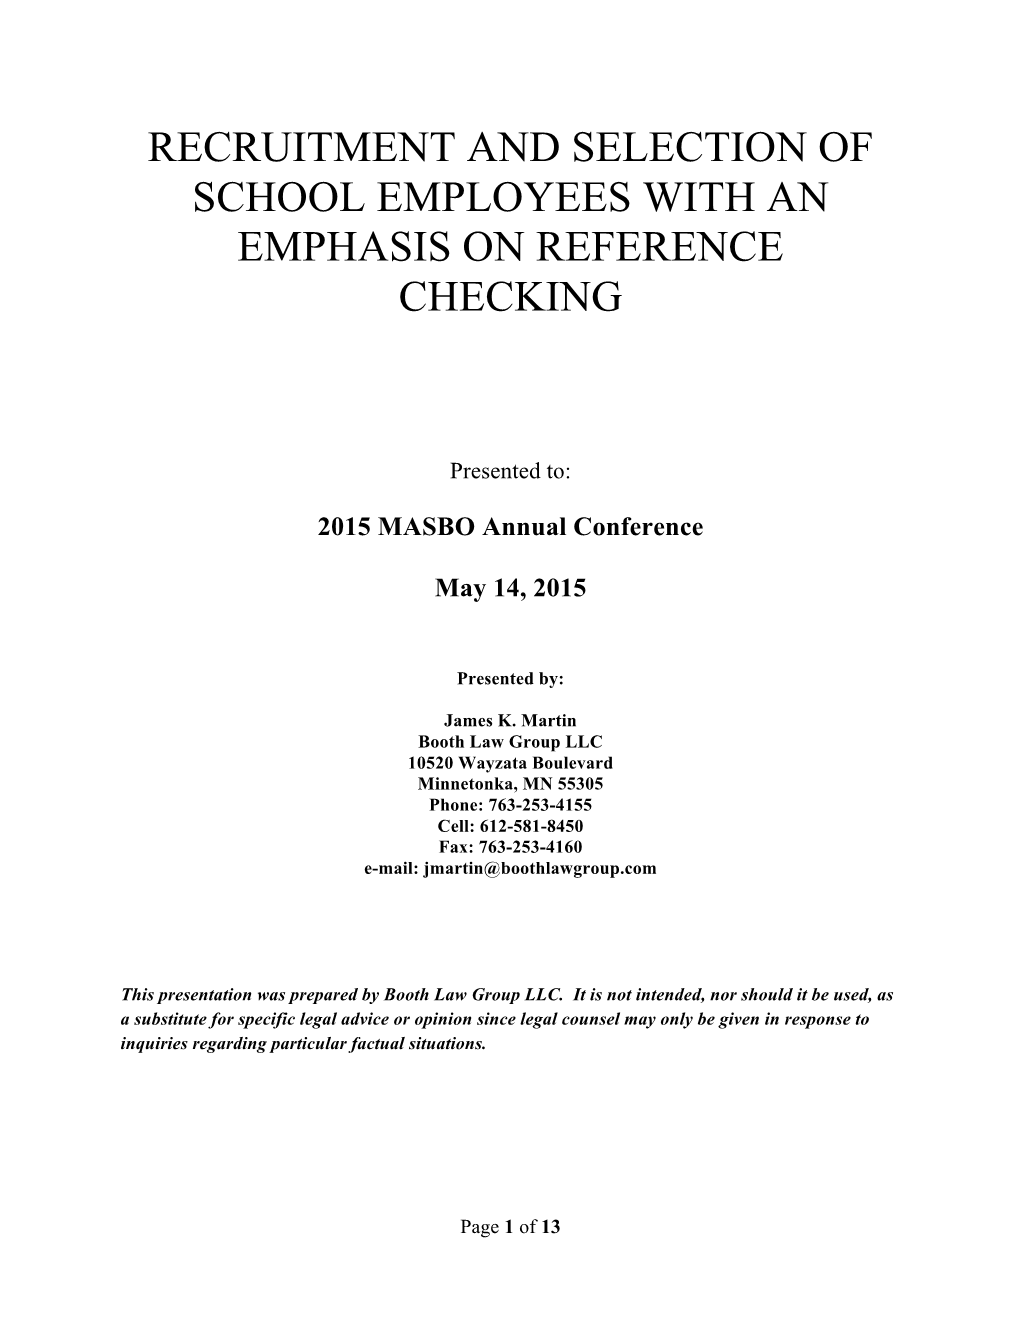 Recruitment and Selection of School Employees with an Emphasis on Reference Checking